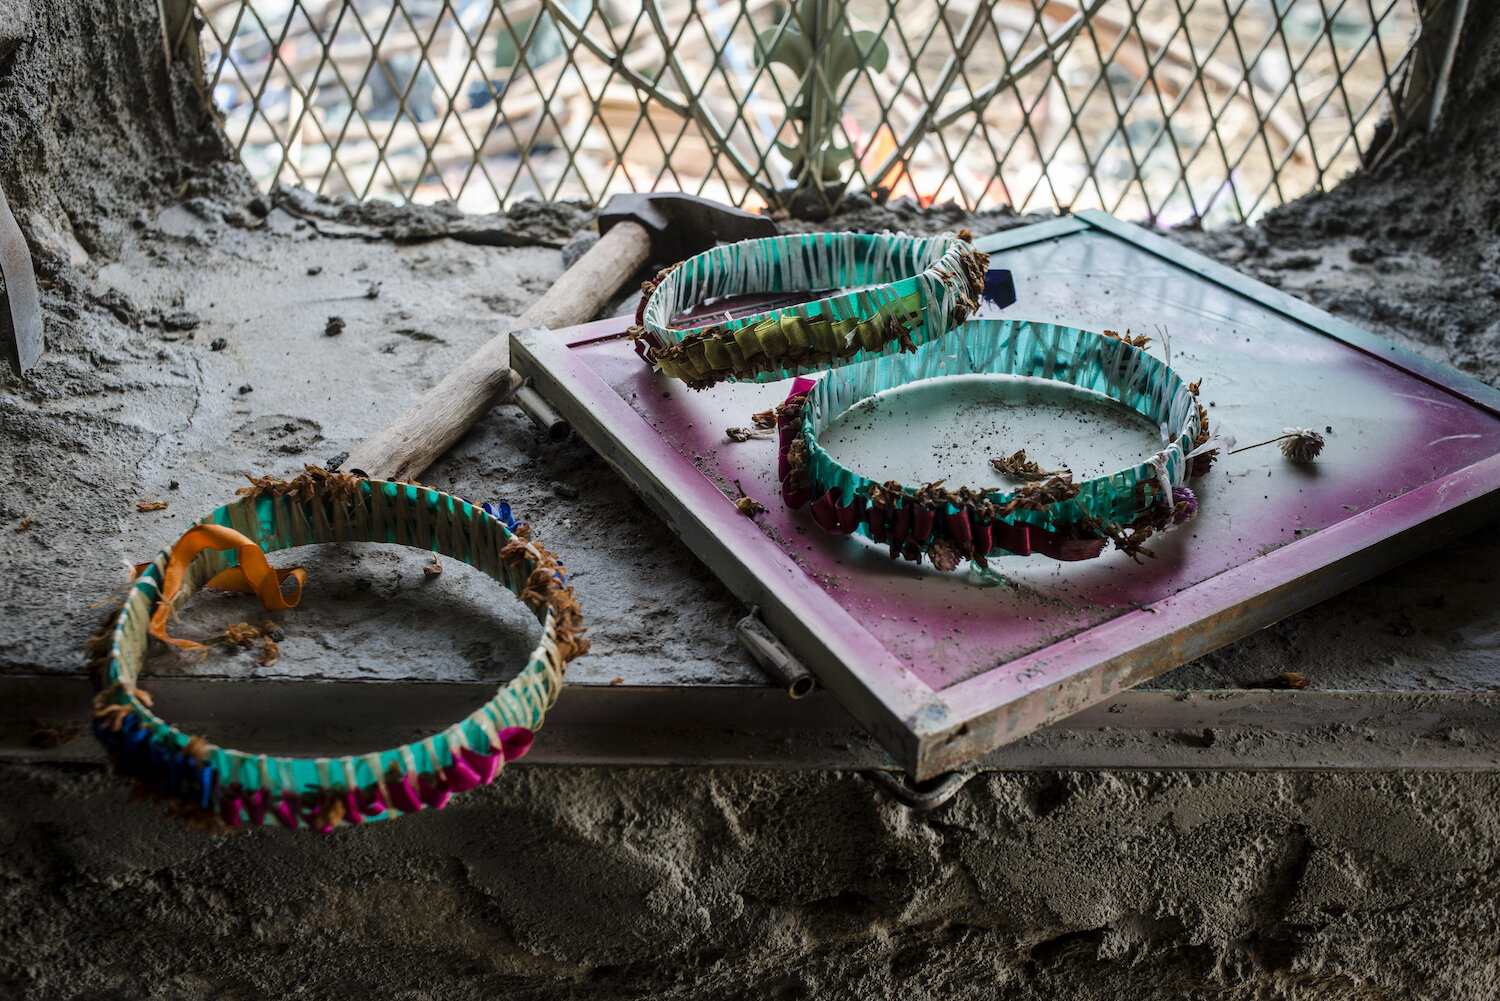  Wreaths worn by those celebrating at the wedding sit amid the rubble on May 6, 2018 in al Ragha Village, Bani Qais District, Hajjah, Yemen. The villagers had been celebrating late into the night when the airstrike hit; most of the dead were in piece